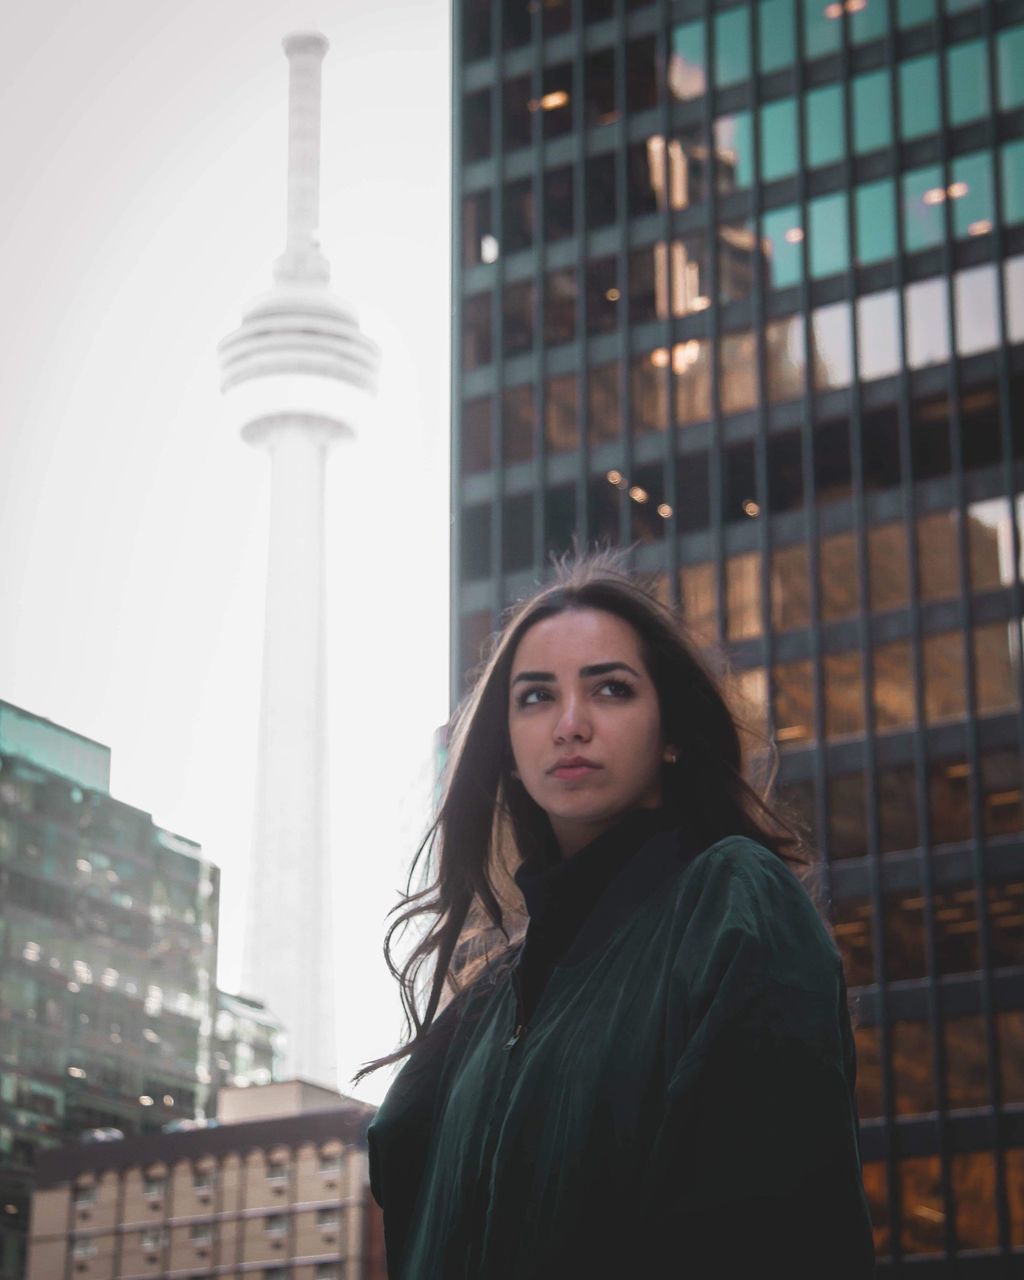 architecture, built structure, building exterior, one person, city, portrait, young adult, building, beauty, lifestyles, looking at camera, hair, real people, leisure activity, young women, tower, office building exterior, women, hairstyle, skyscraper, tall - high, beautiful woman, outdoors, modern